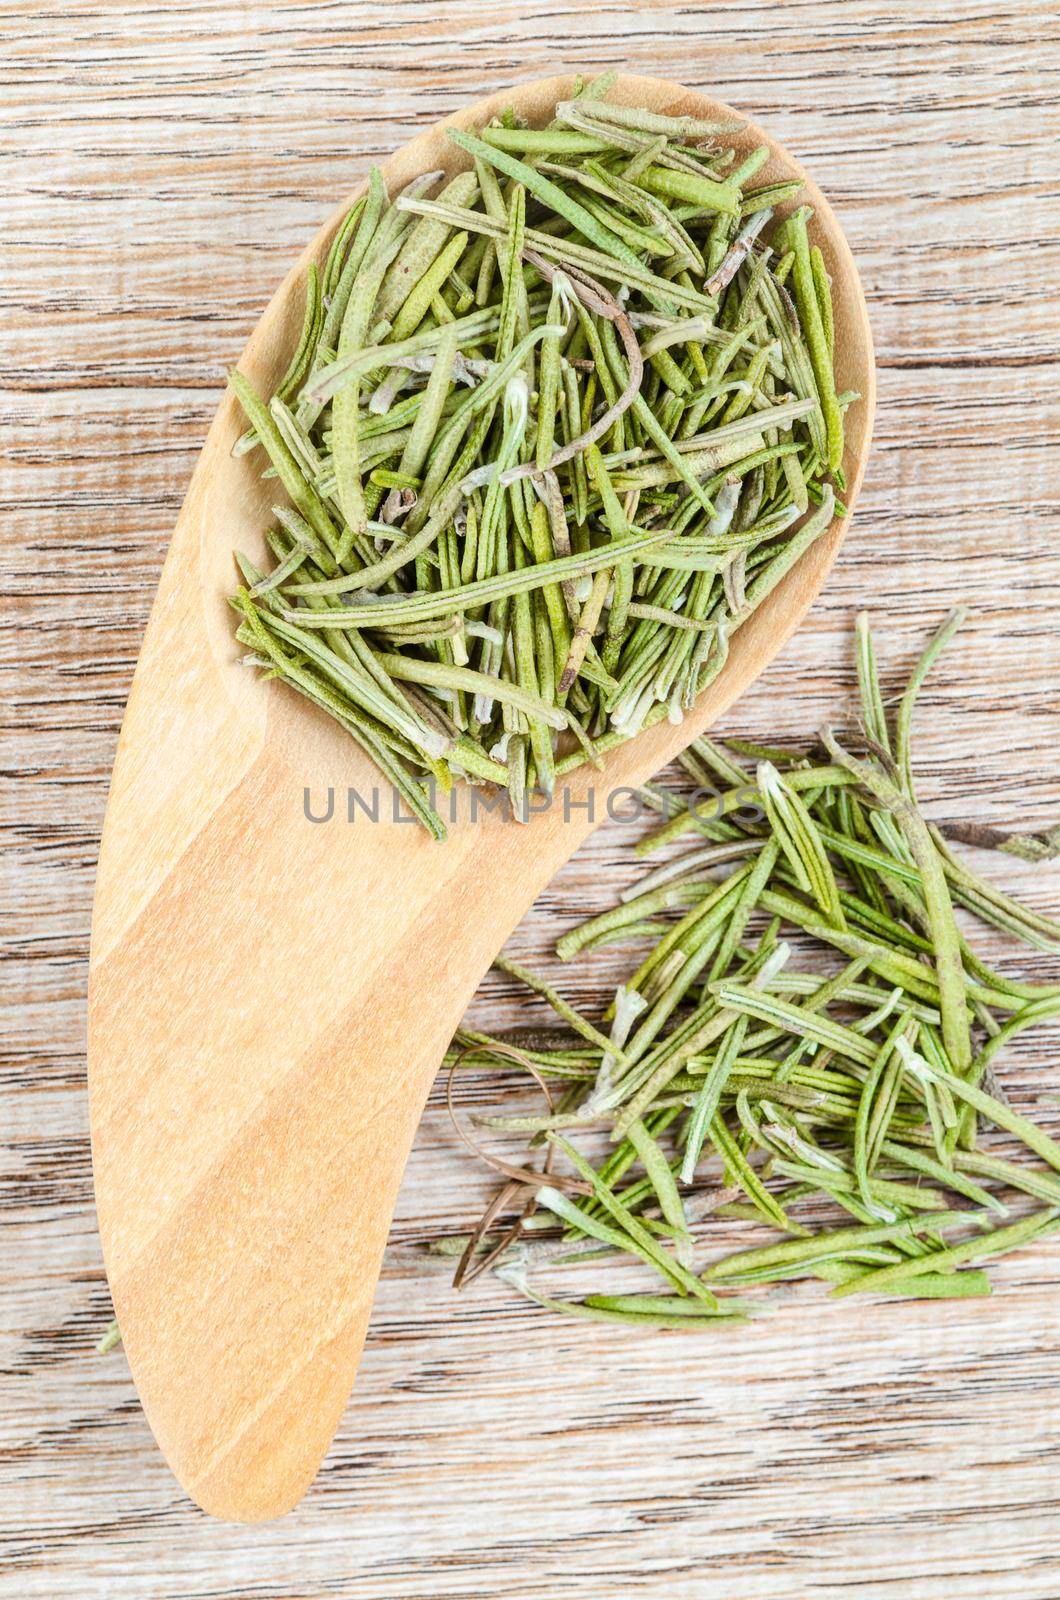 Dried rosemary spice in wooden spoon. Macro with shallow depth of field. by Gamjai